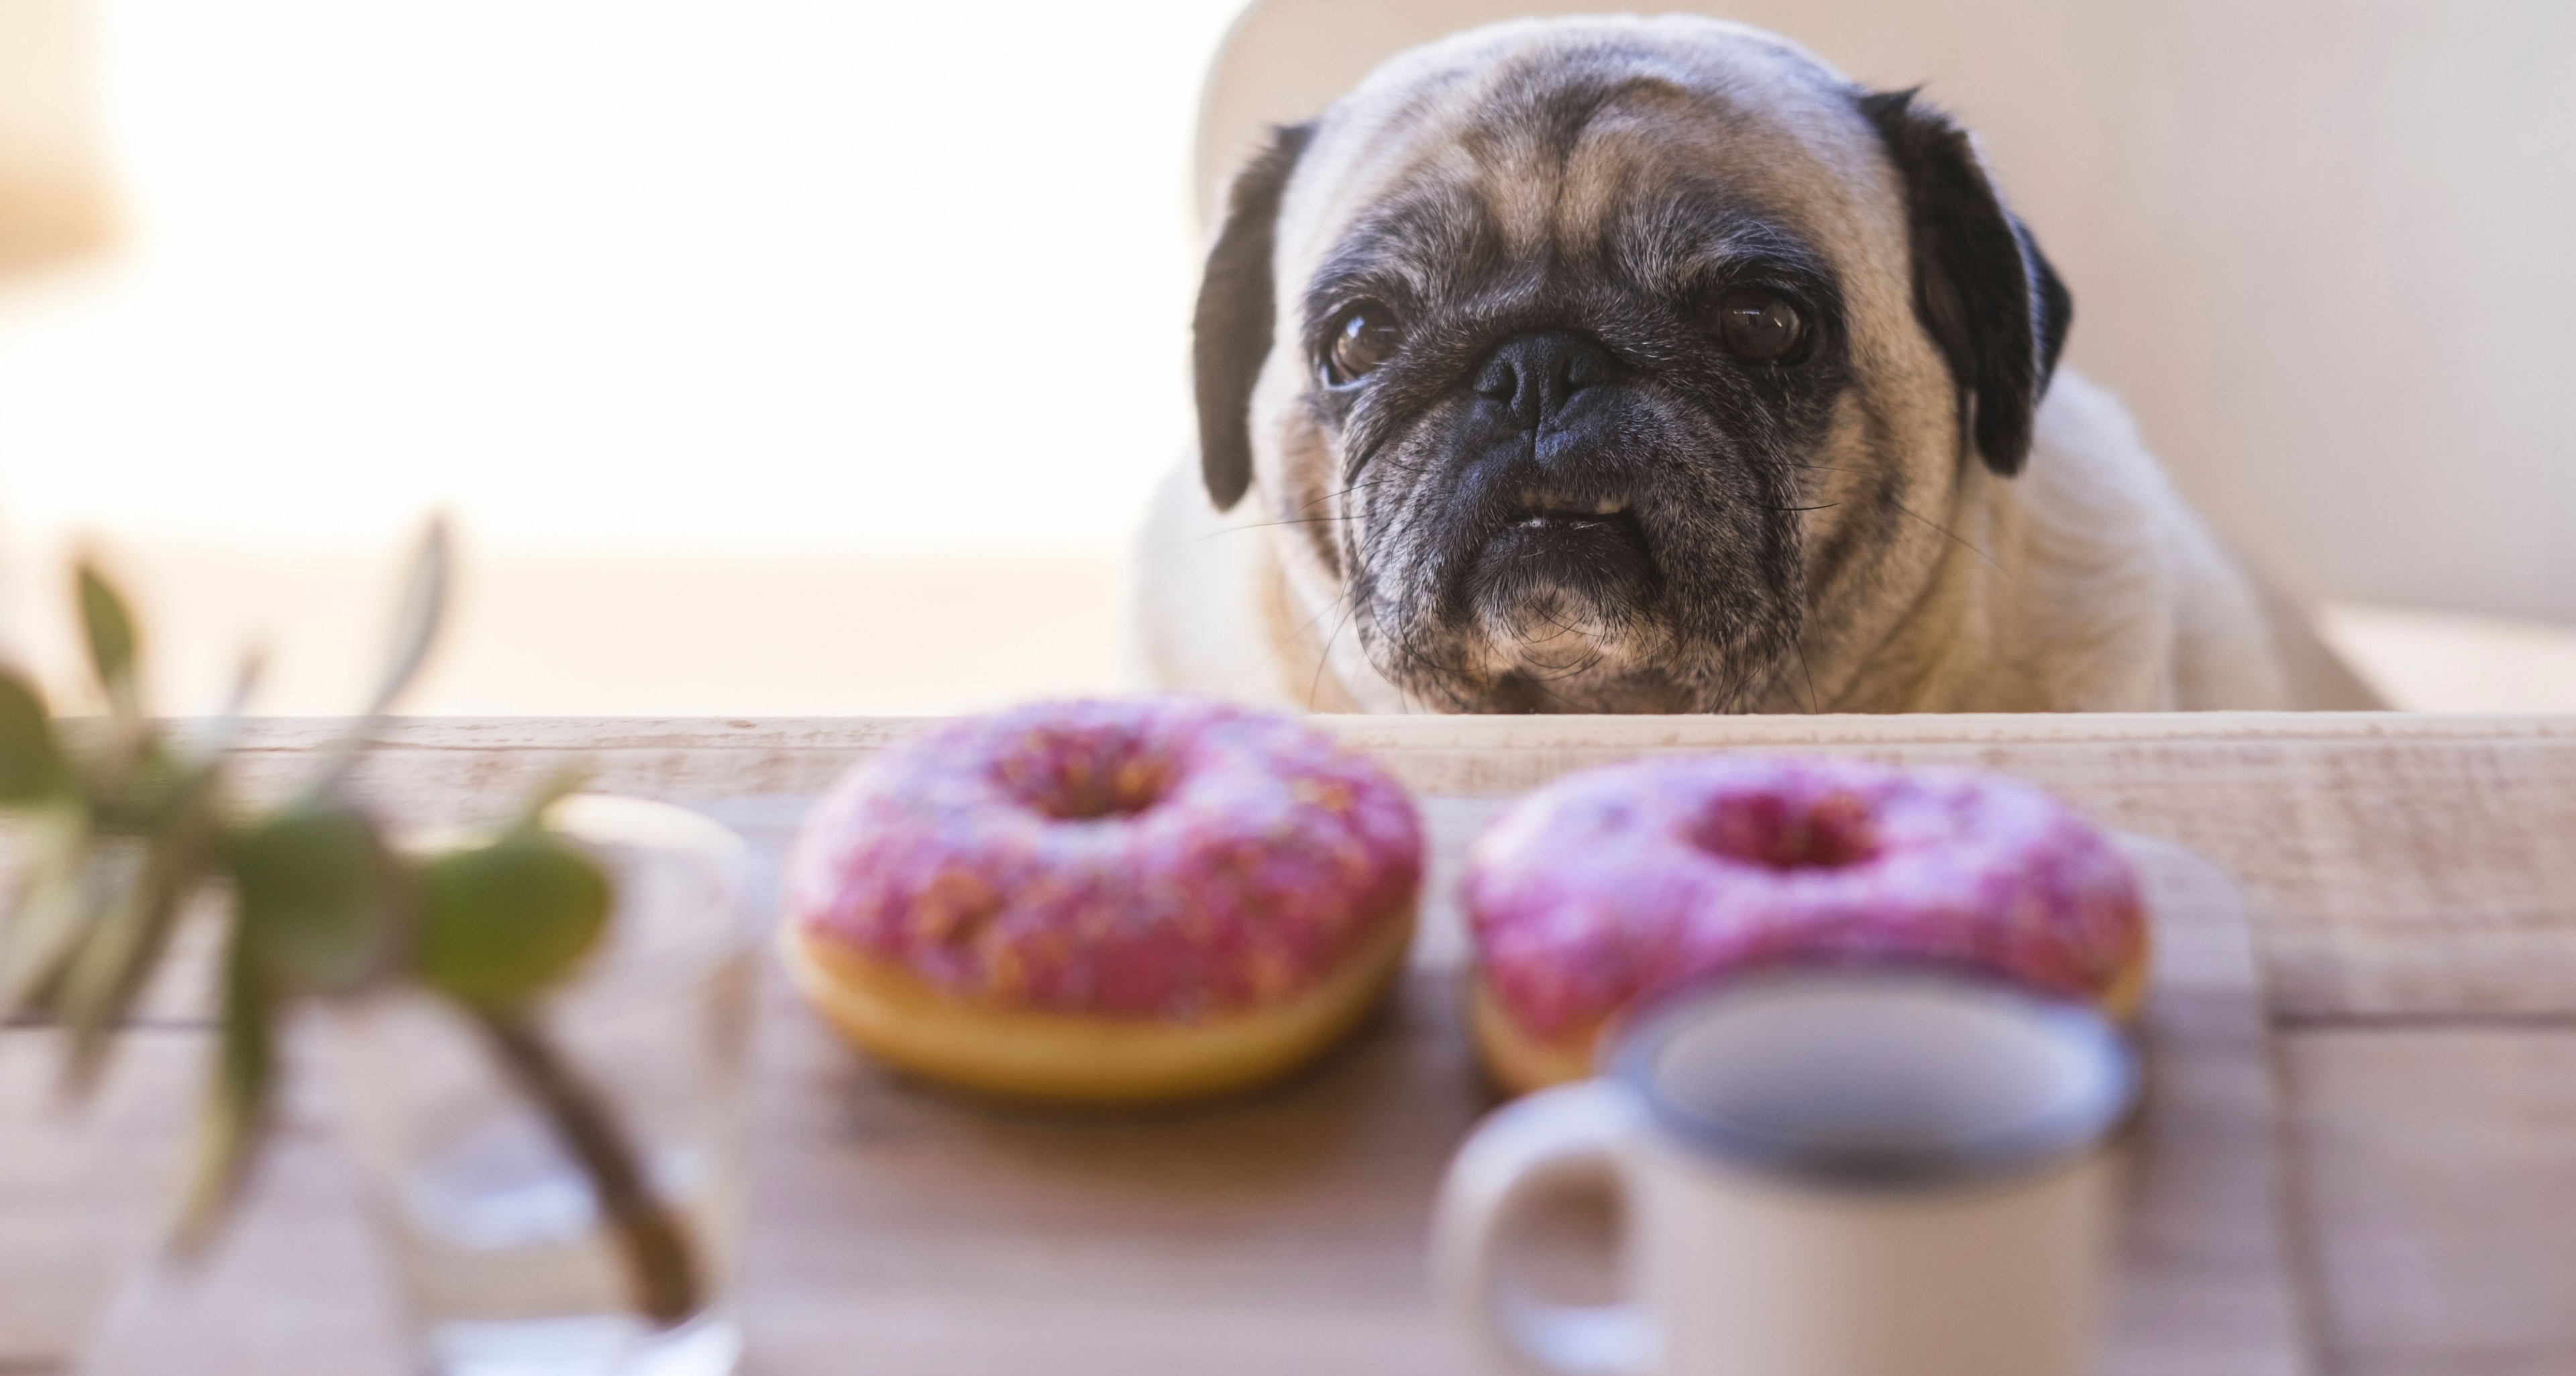 A pug looking at a few donuts on a table